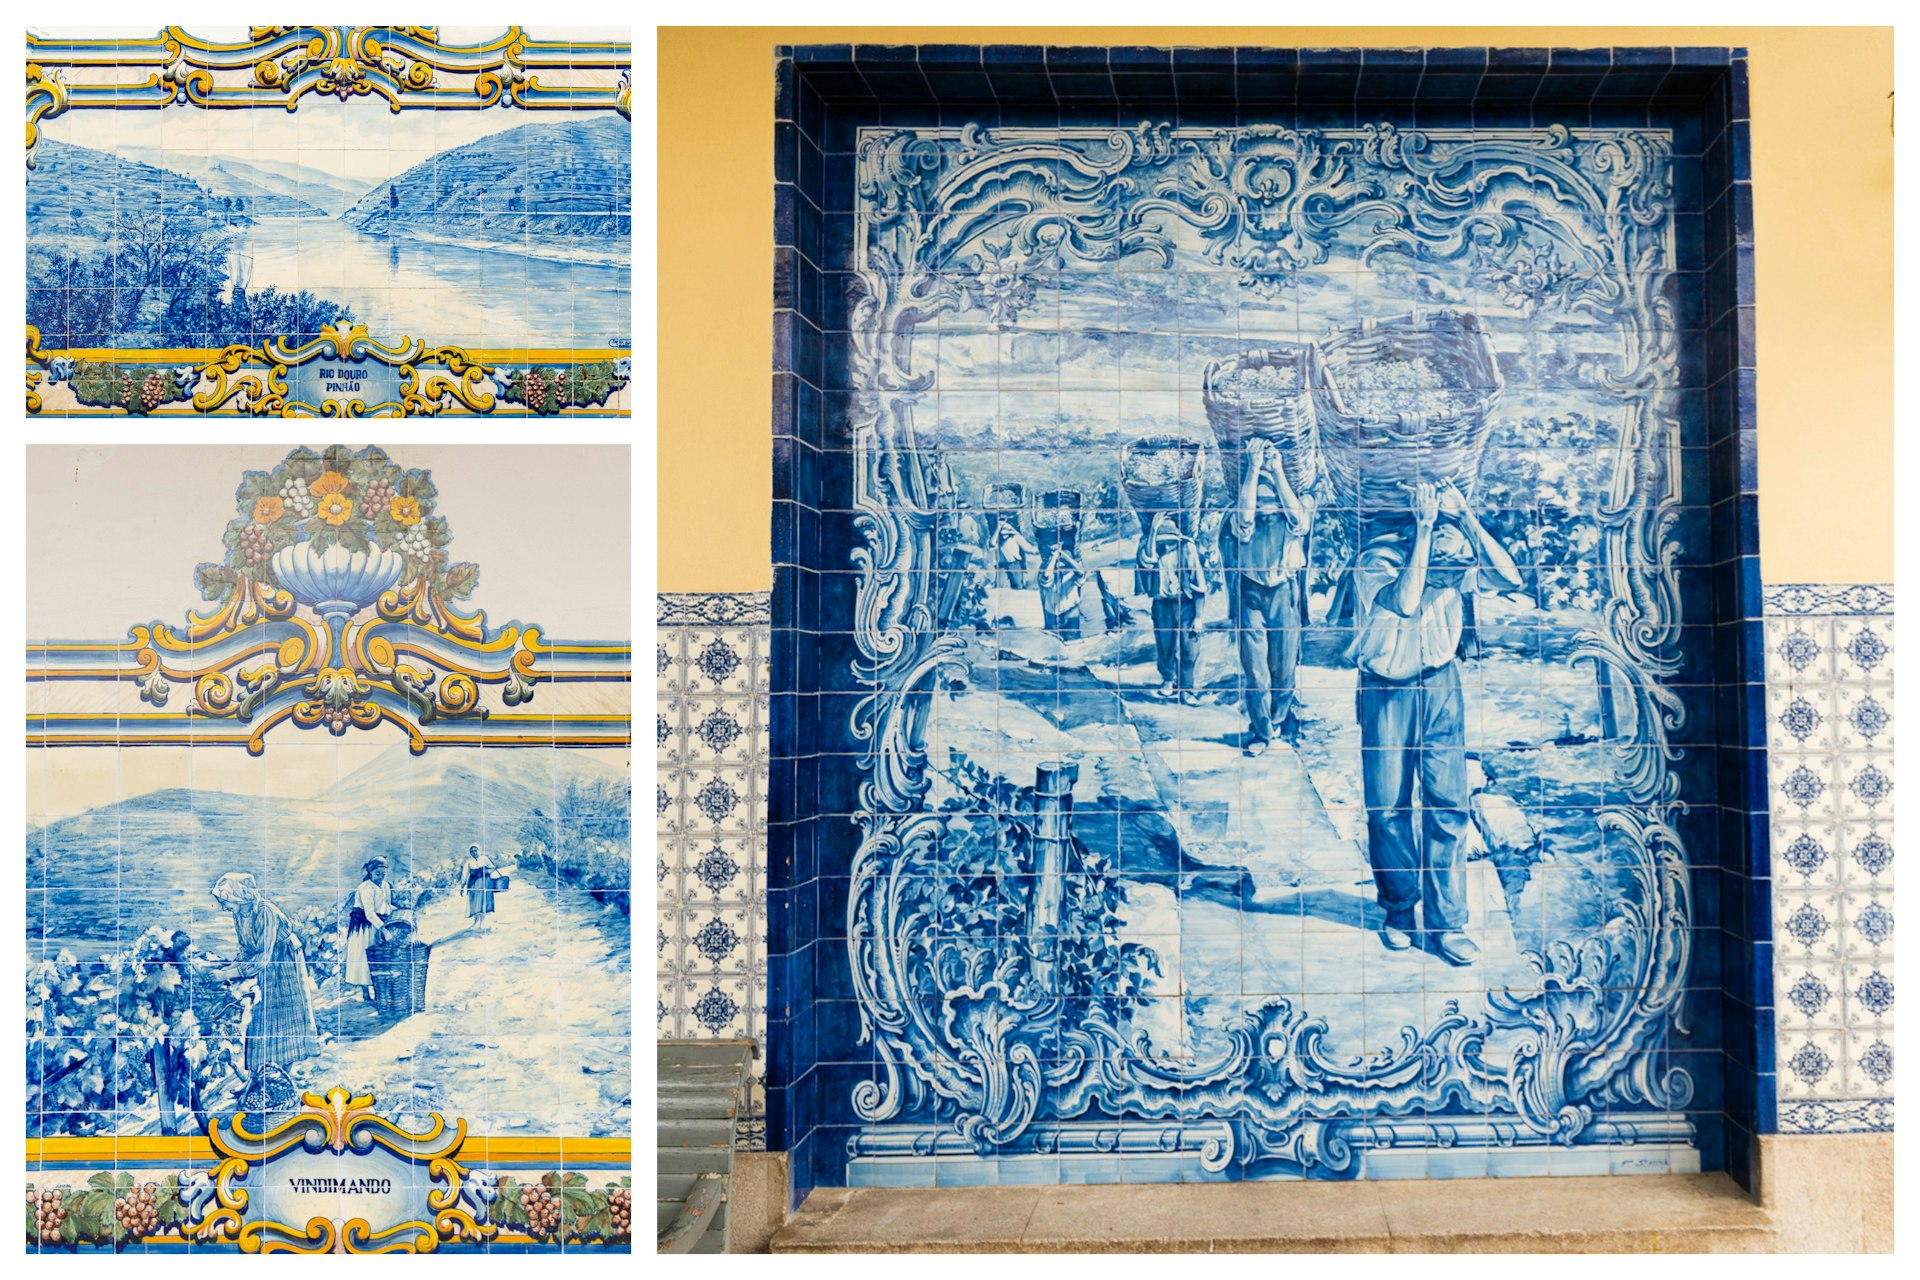 Blue and white tiles depicting scenes of rural farmwork decorate a station wall